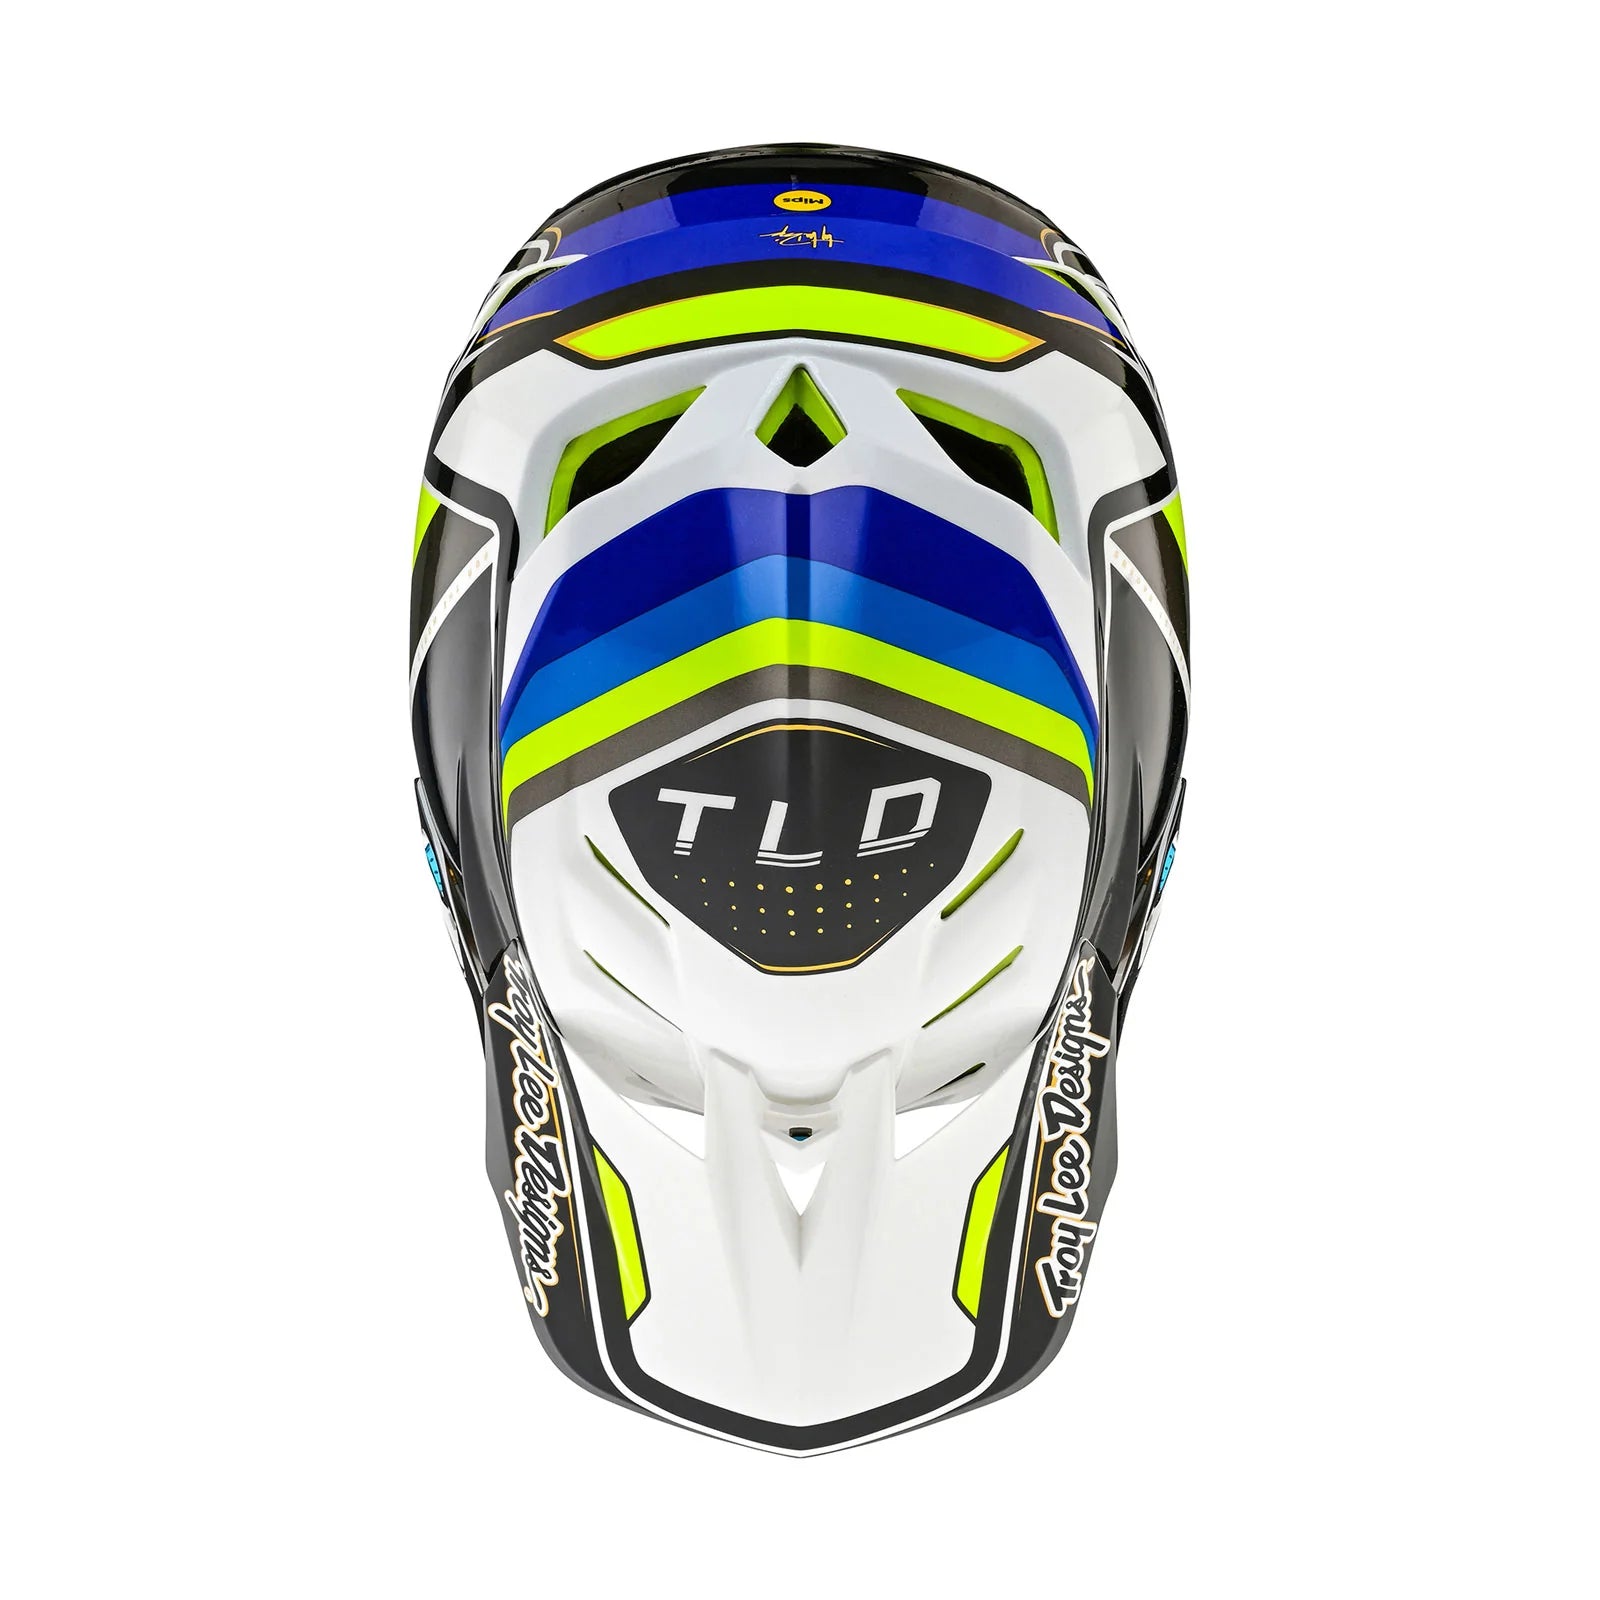 TLD D4 AS Composite Helmet W/MIPS Reverb White safety ensures protection and comfort.